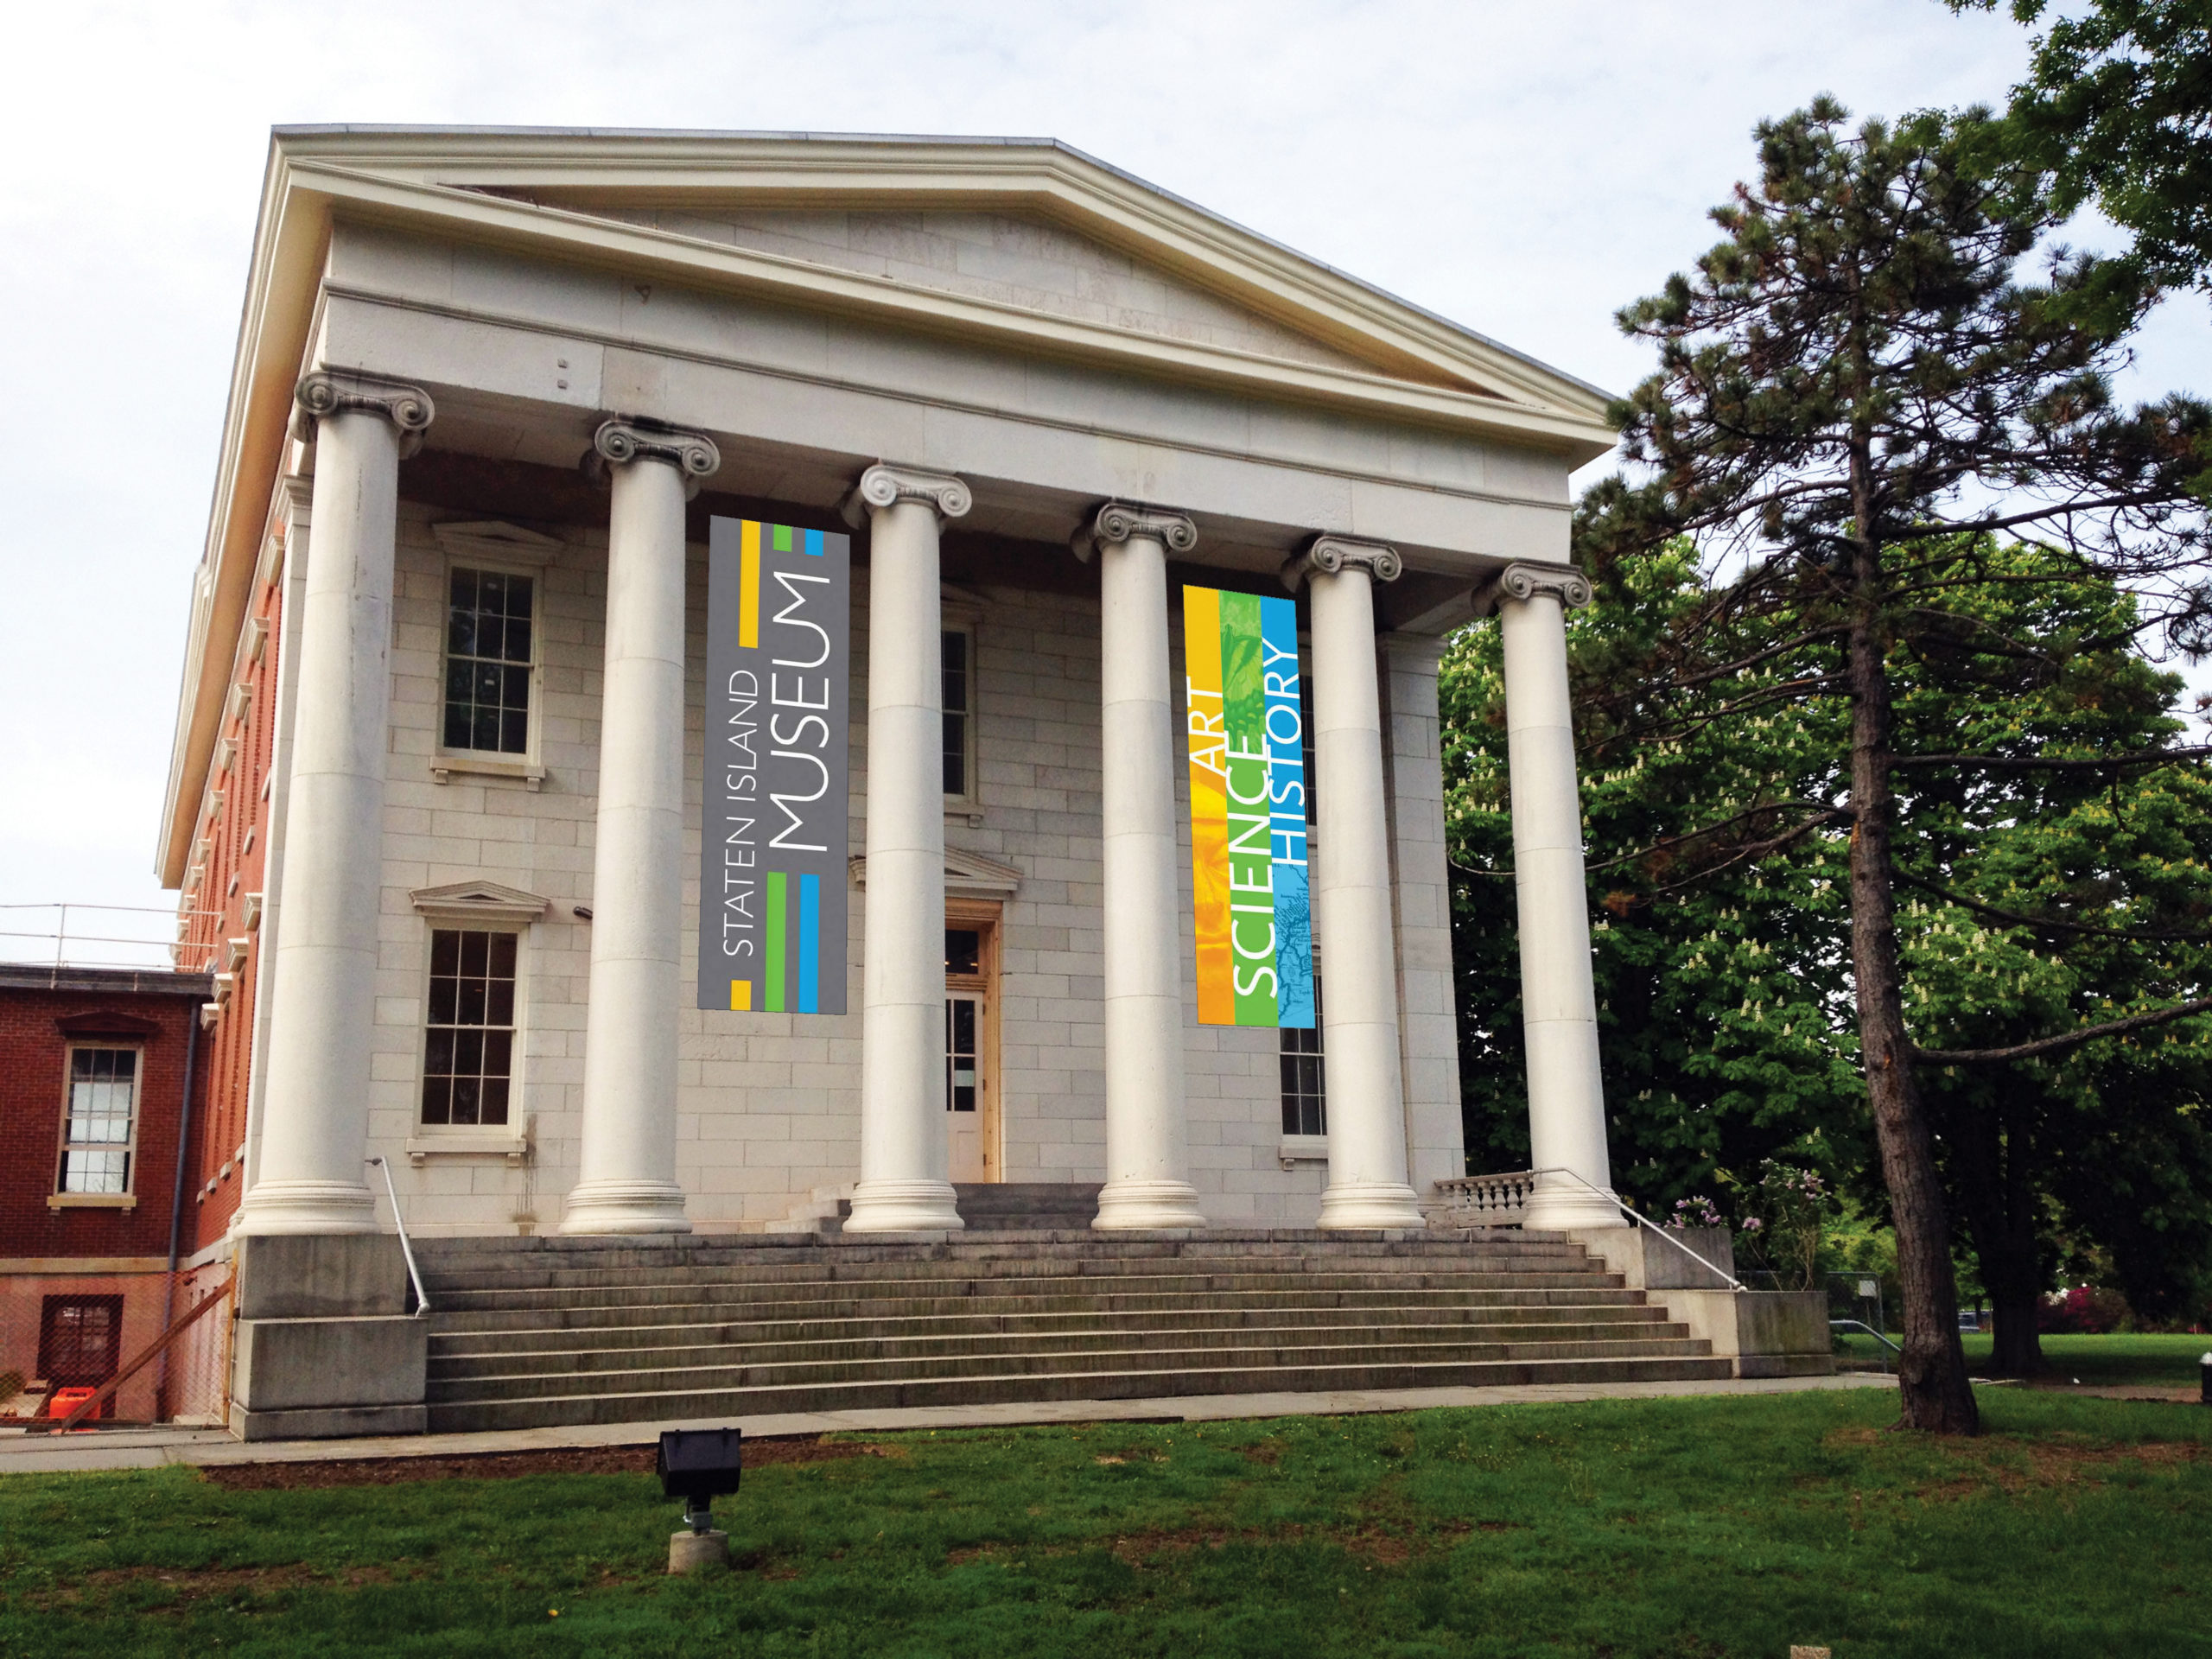 15 Staten Island Museum At Snug Harbor With Banners Photo By Henryk J Behnke Scaled